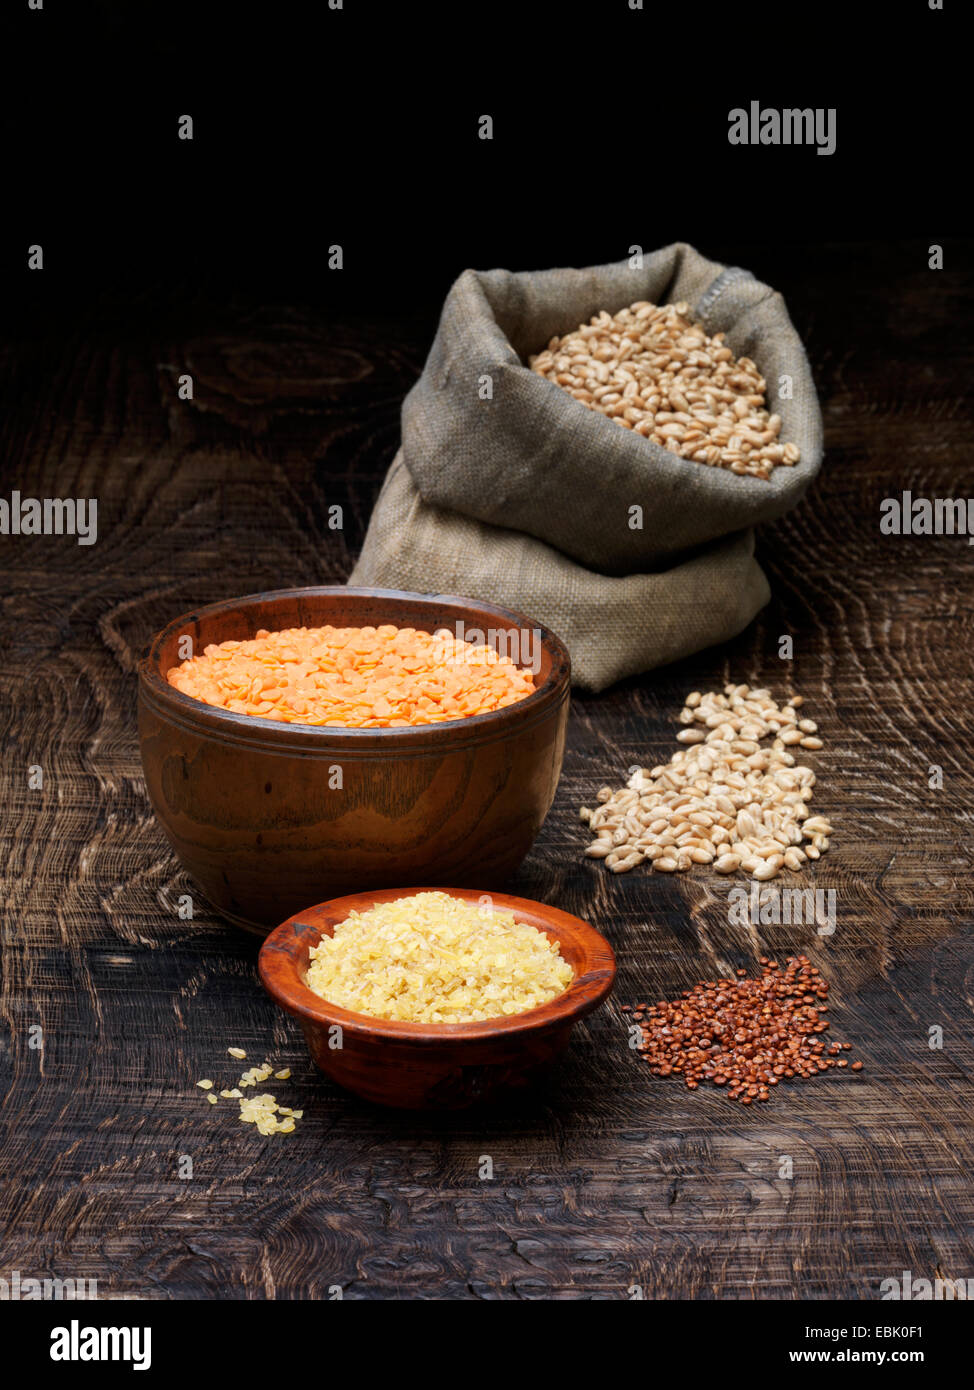 Still life with bowls of red lentils and grains with sack of seeds Stock Photo